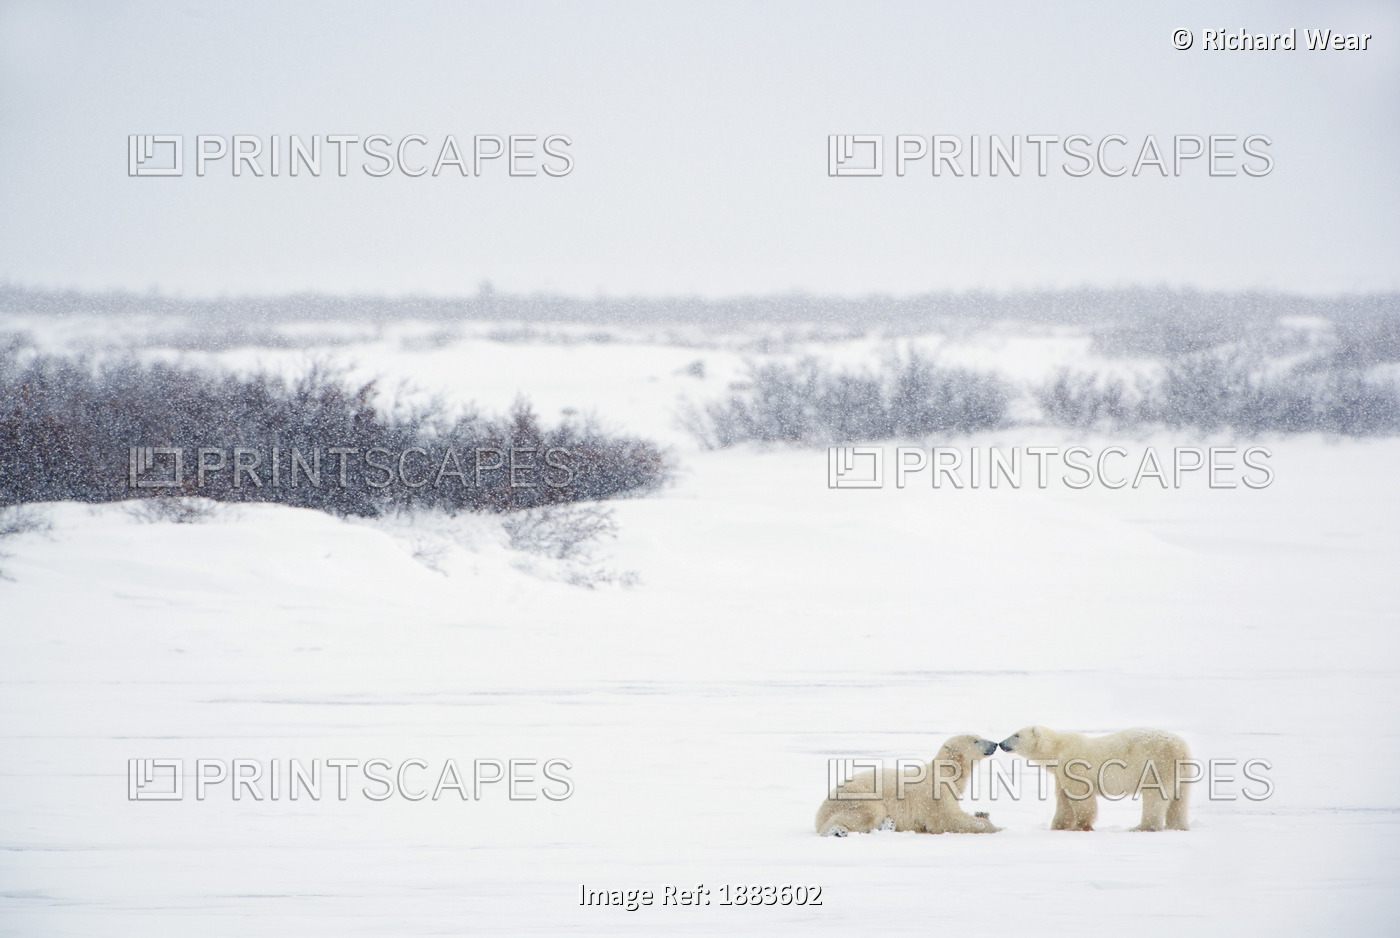 Two Polar Bears (Ursus Maritimus) Showing Affection By Kissing Each Other; ...